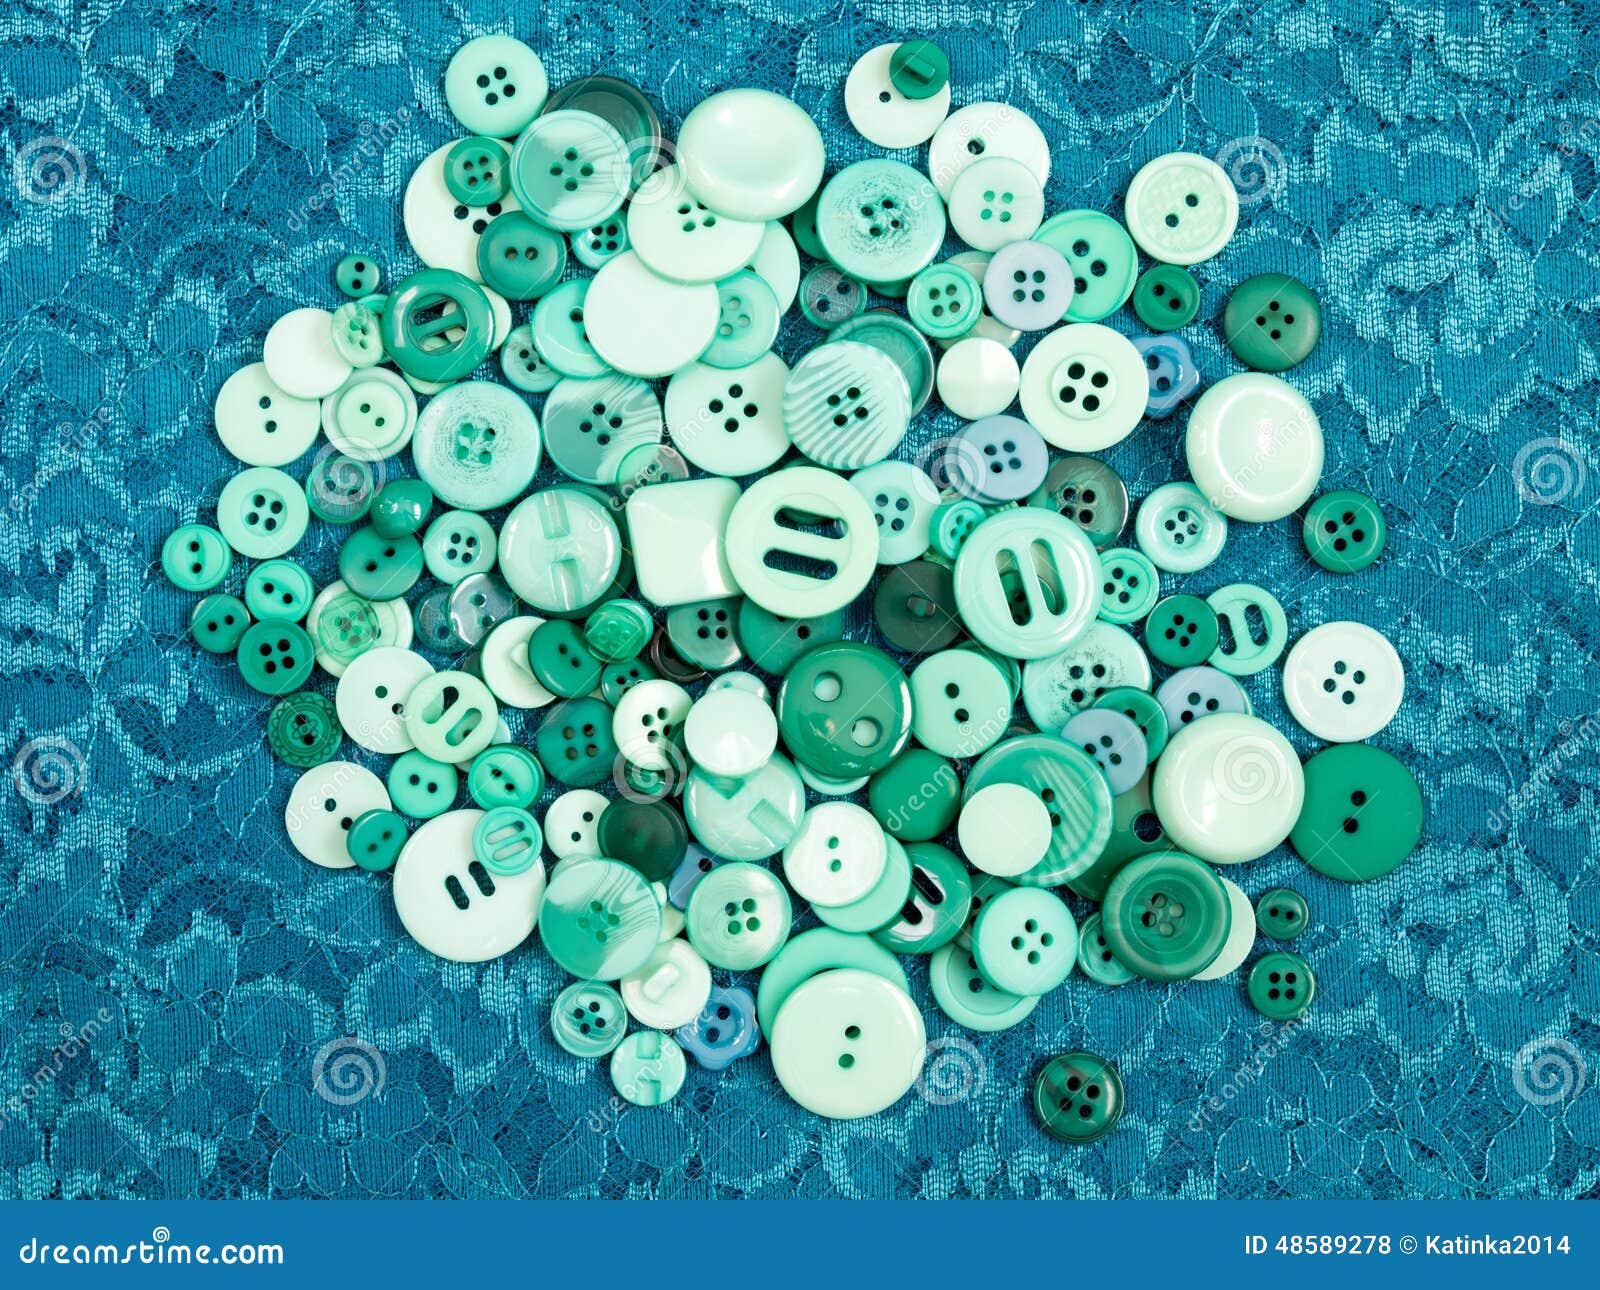 buttons, blue buttons, assorted buttons, sewing buttons